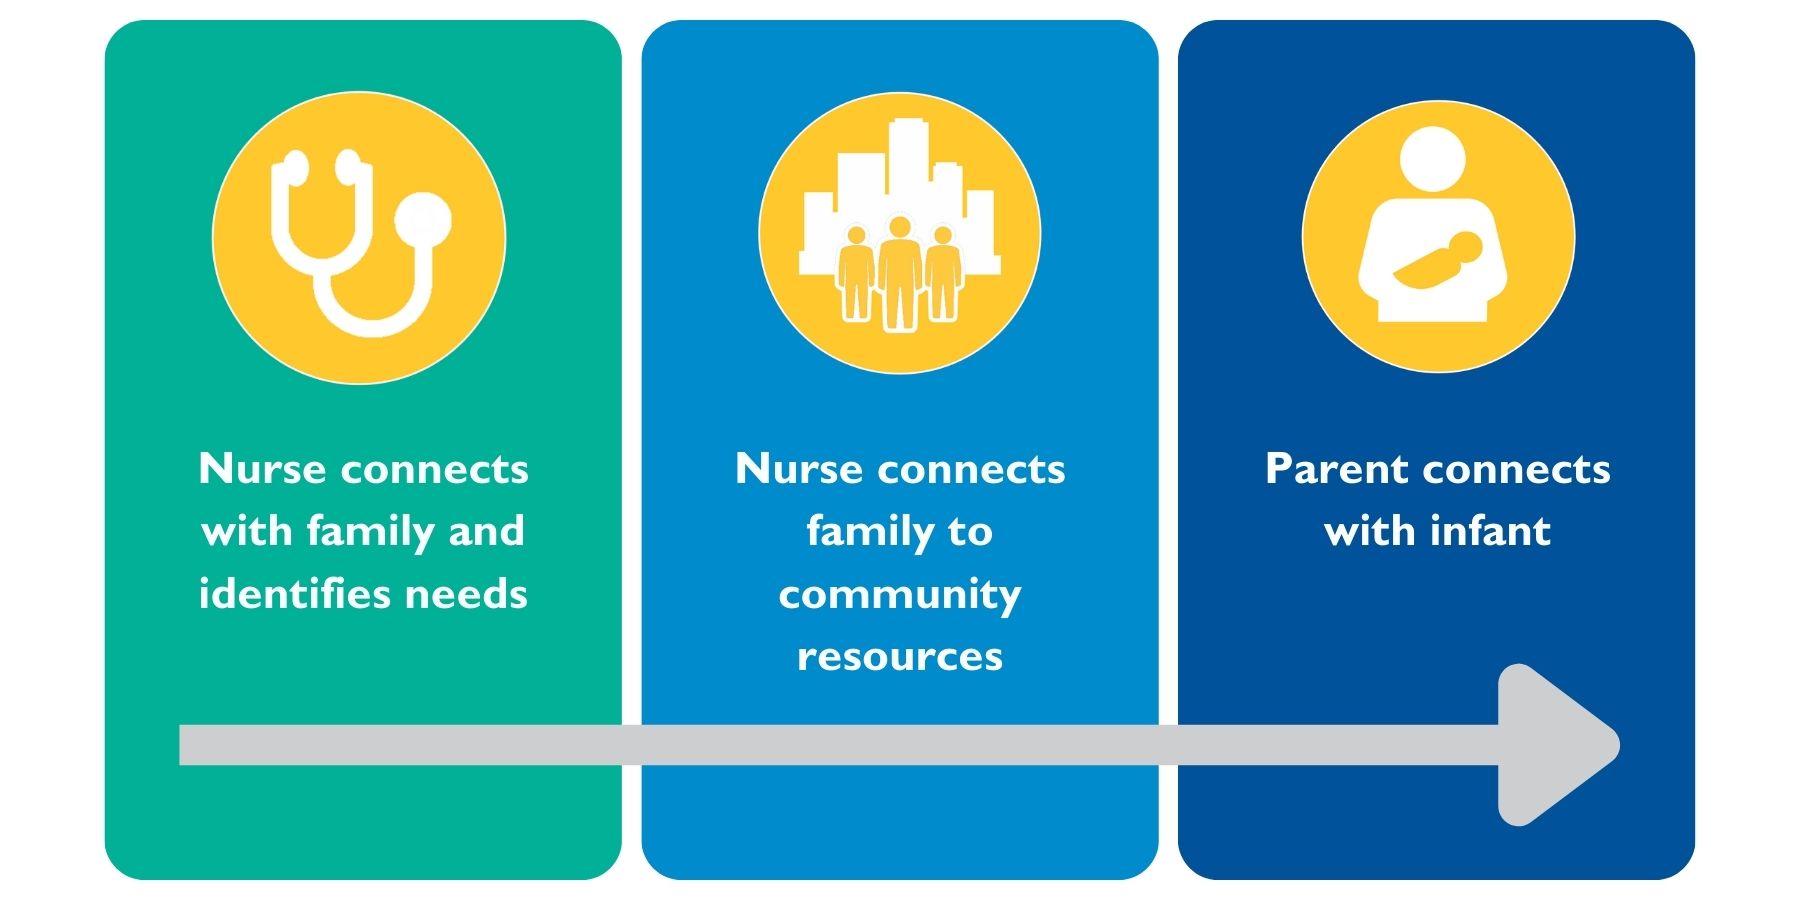 Three blue panels with circular yellow icons of a community, a stethoscope, and a family.